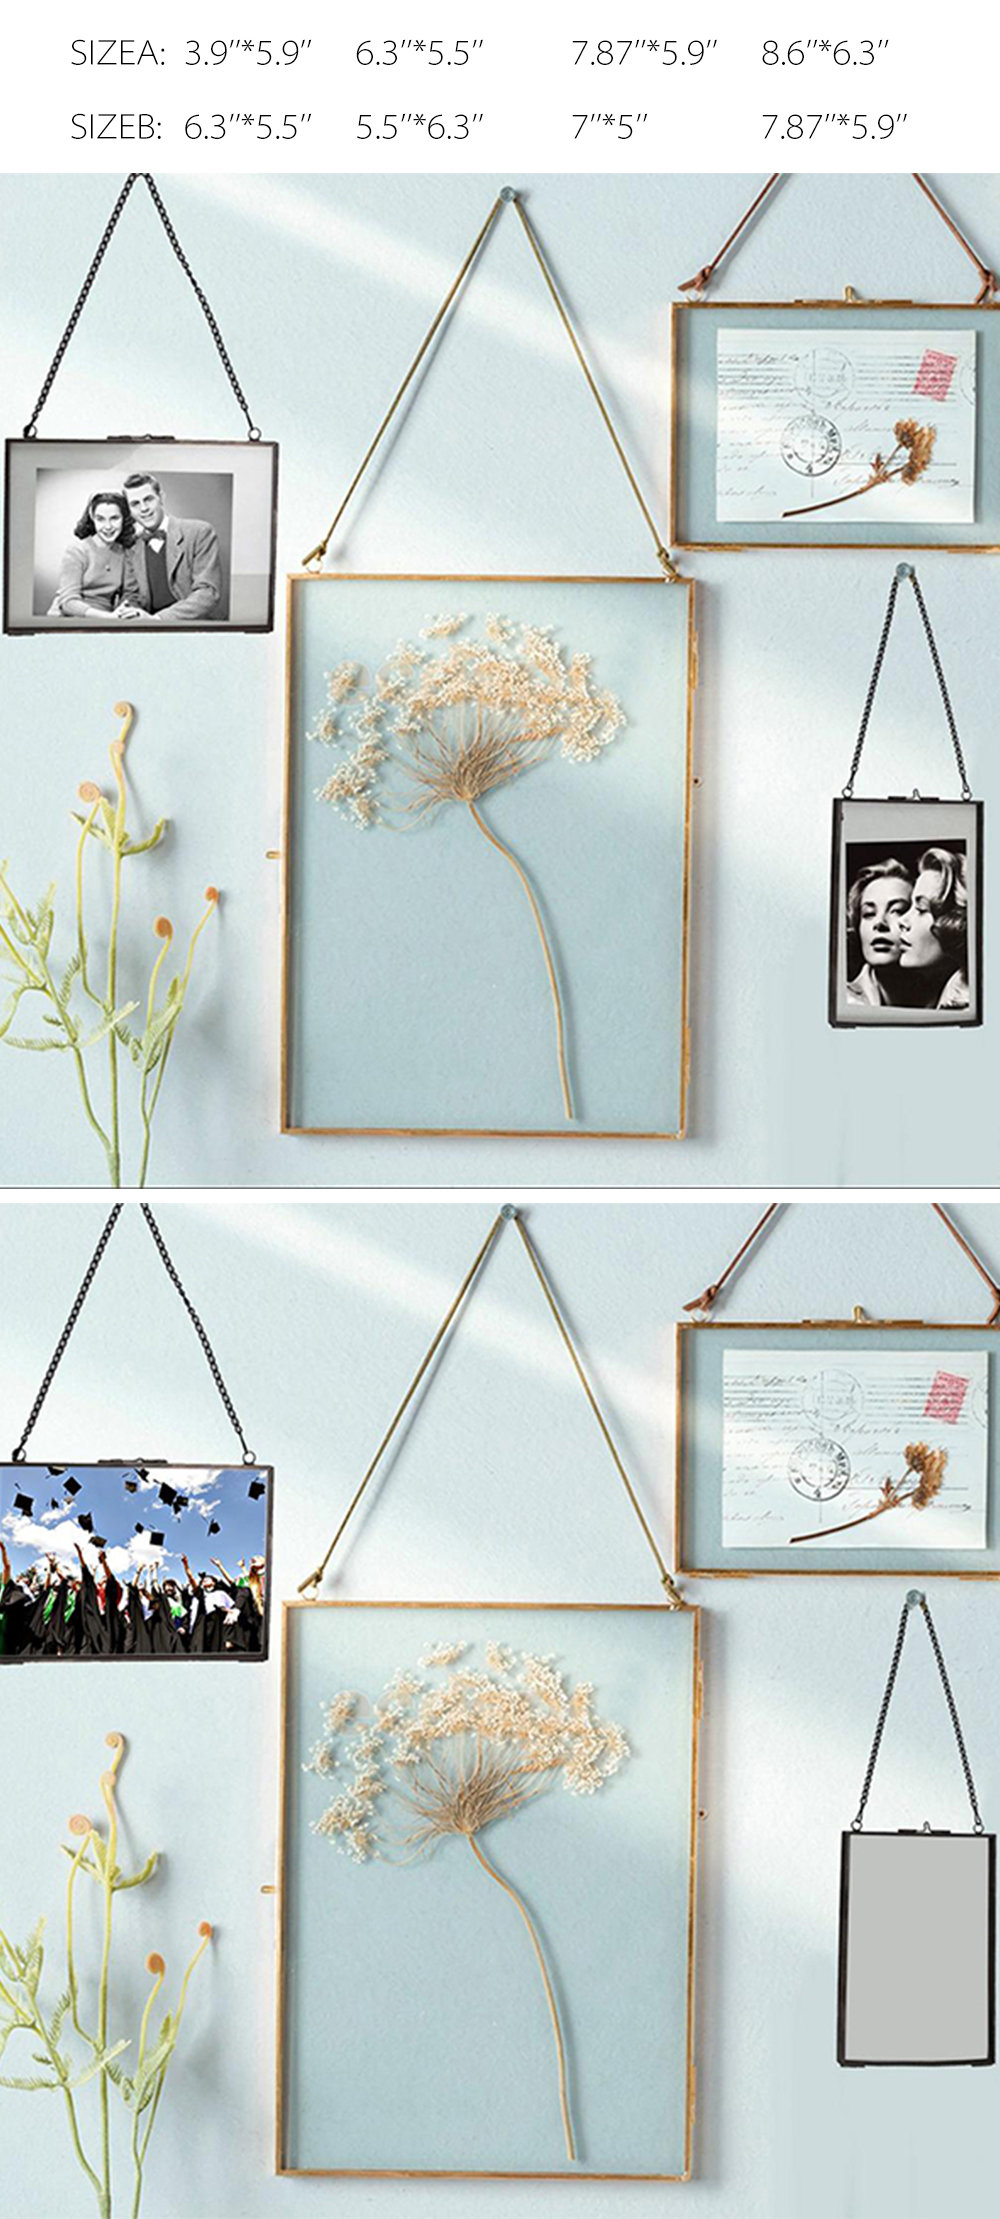 Metal & Glass Double Sided Hanging Photo Picture Frame Wall Display Industrial 